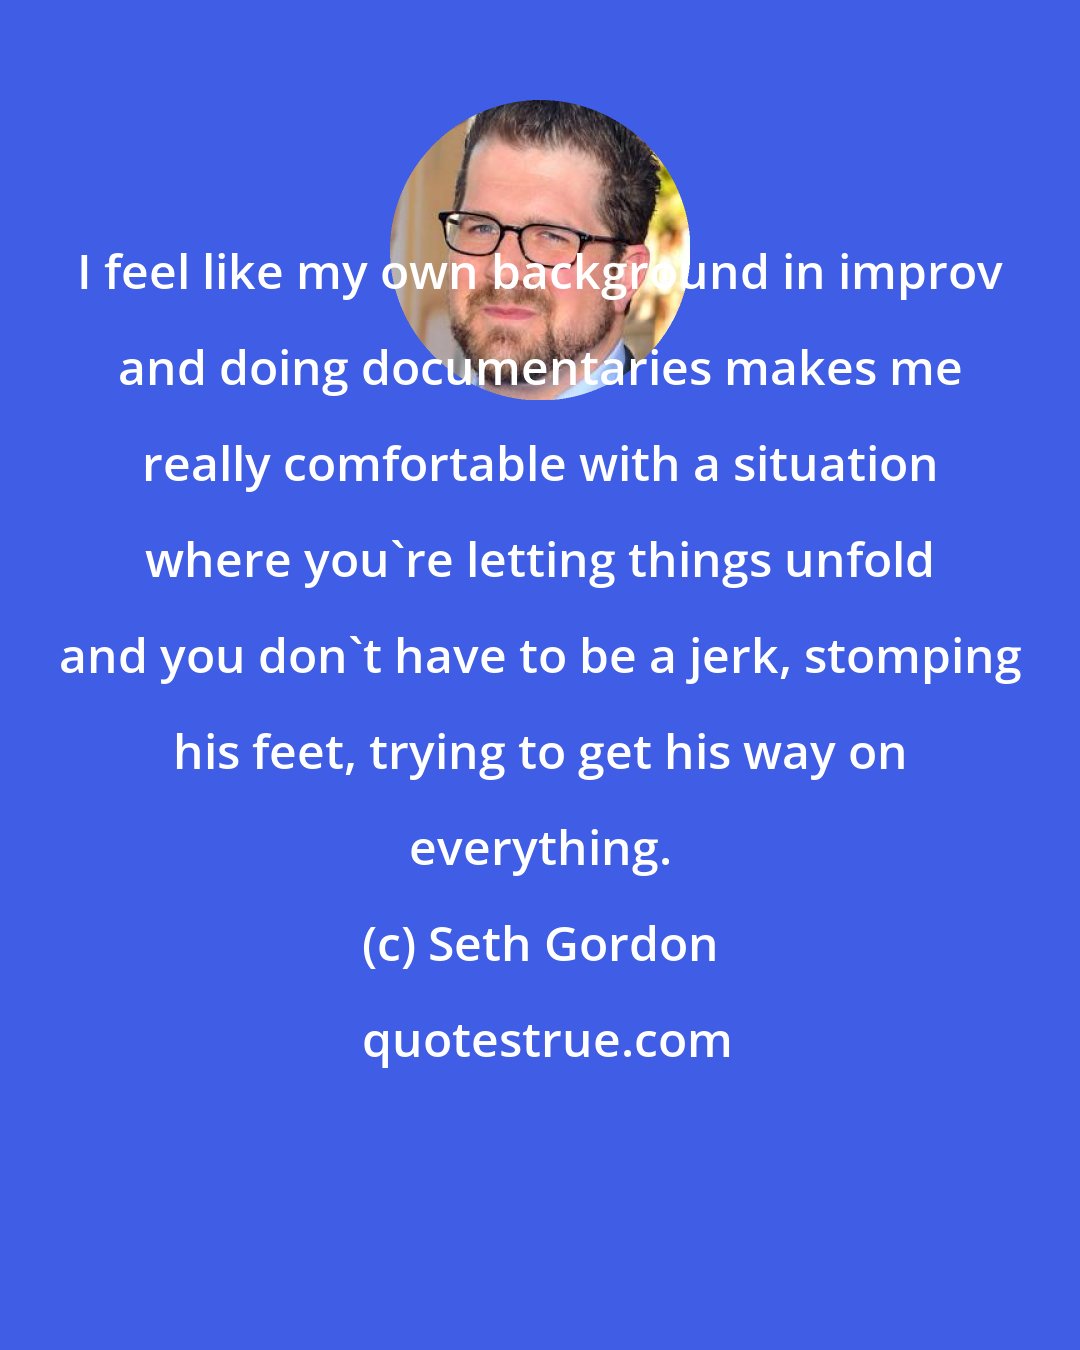 Seth Gordon: I feel like my own background in improv and doing documentaries makes me really comfortable with a situation where you're letting things unfold and you don't have to be a jerk, stomping his feet, trying to get his way on everything.